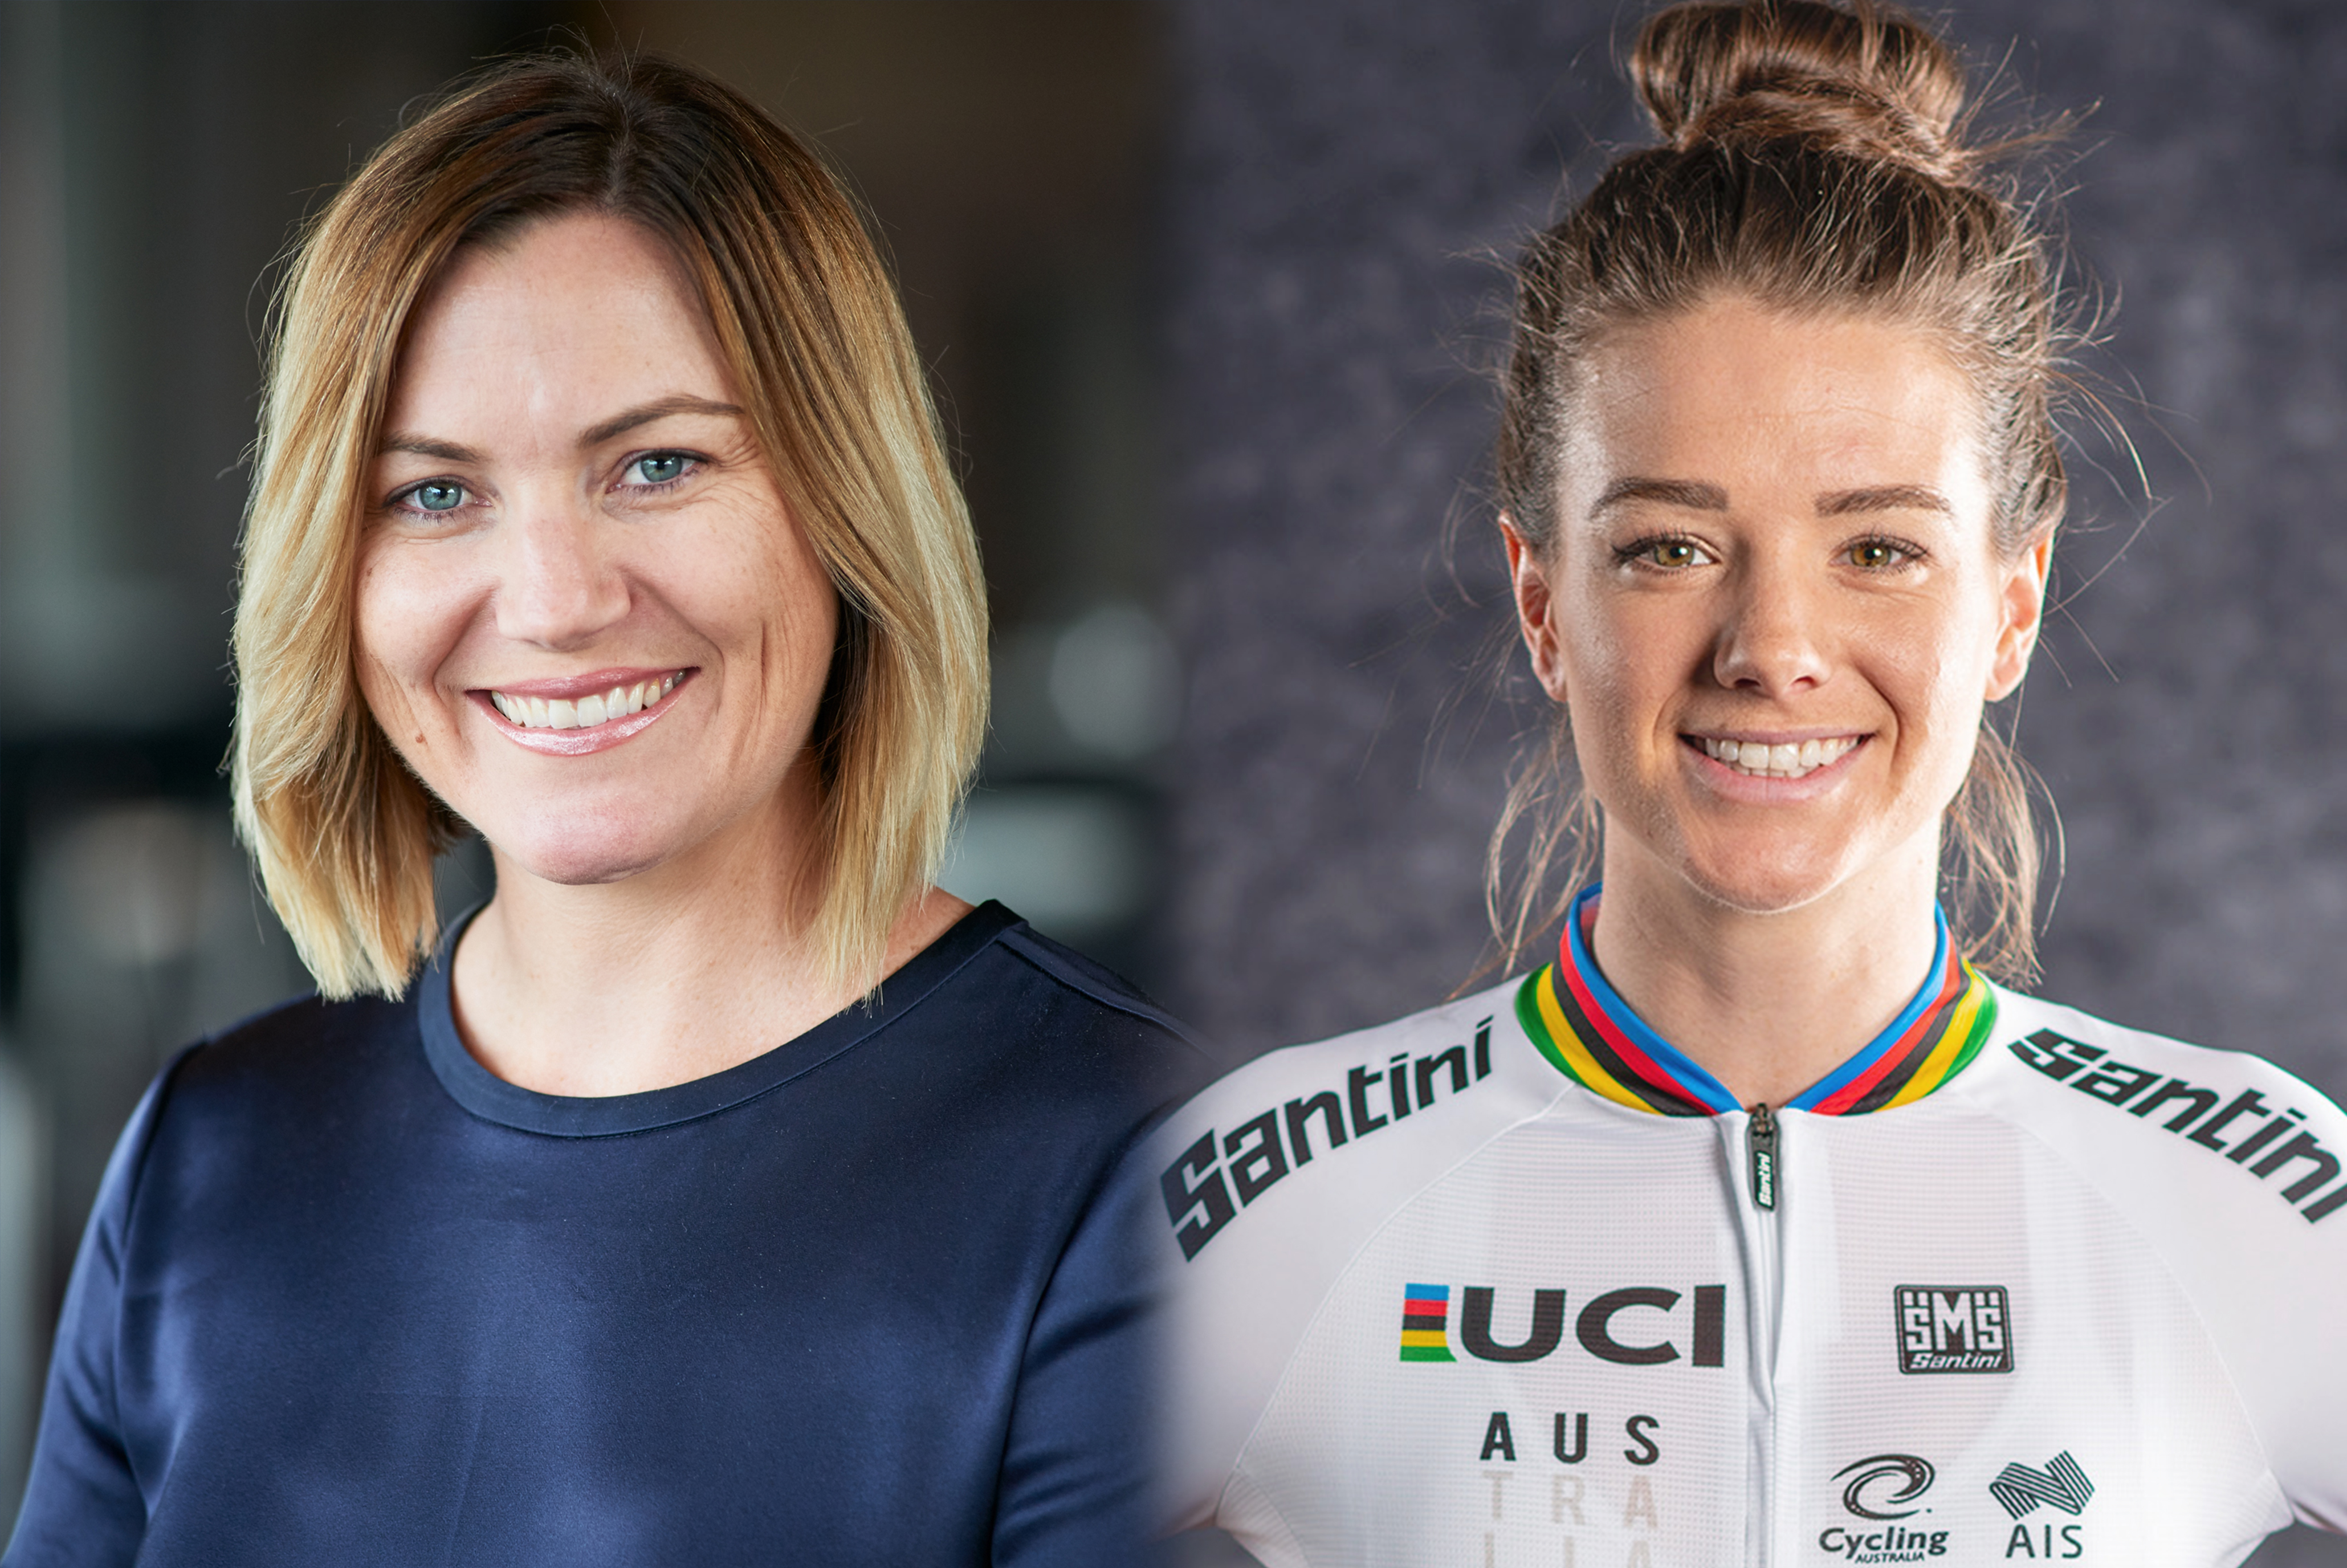 Brand ambassadors Anna Meares and Amy Cure Announced